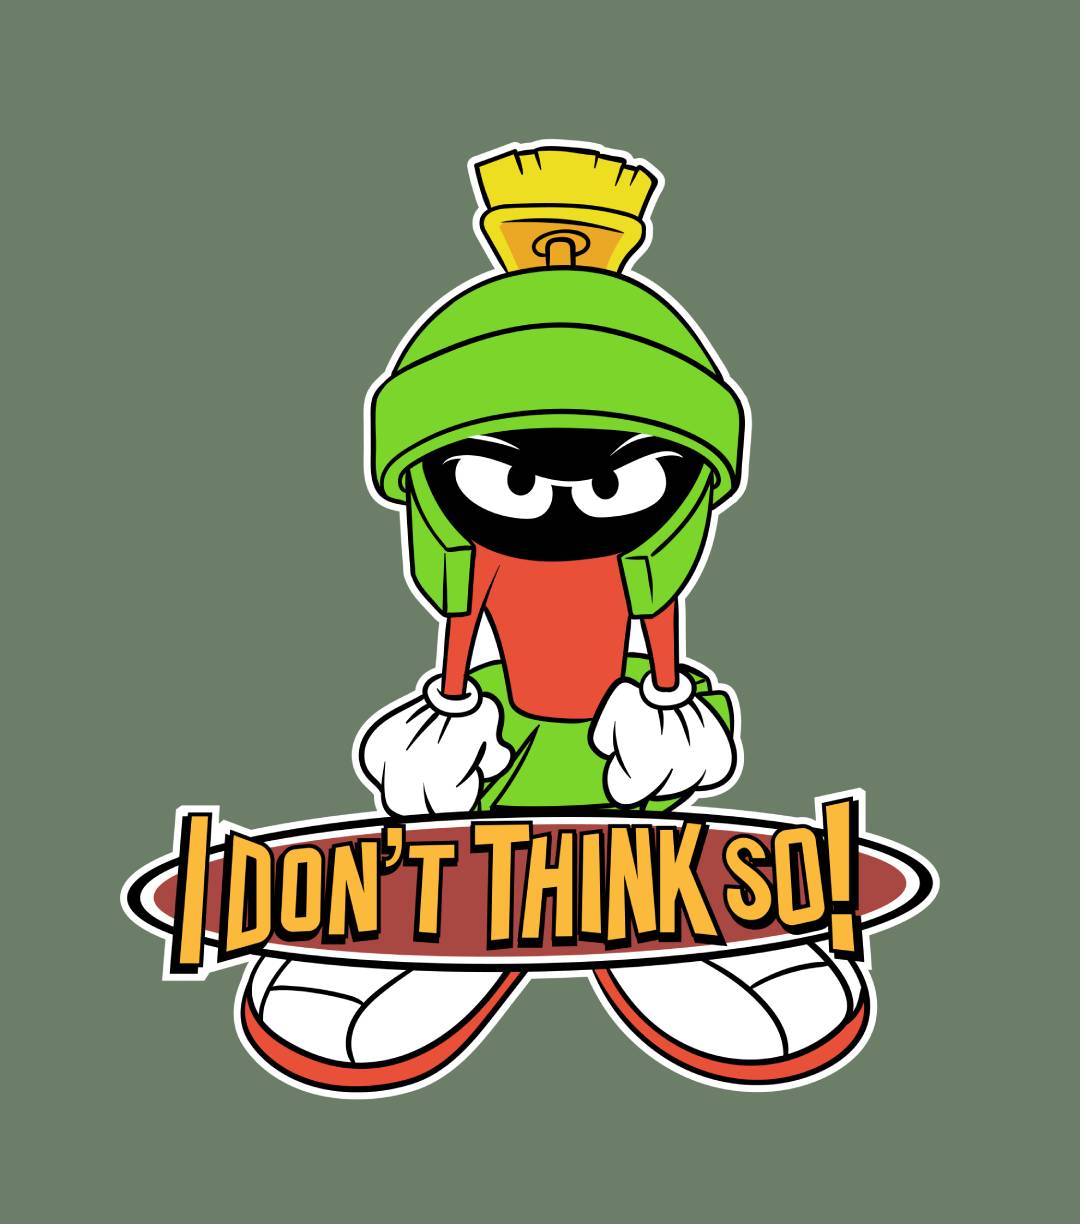 1998 Marvin The Martian I Dont Think So Vintage T-Shirt Size Large Green 90s